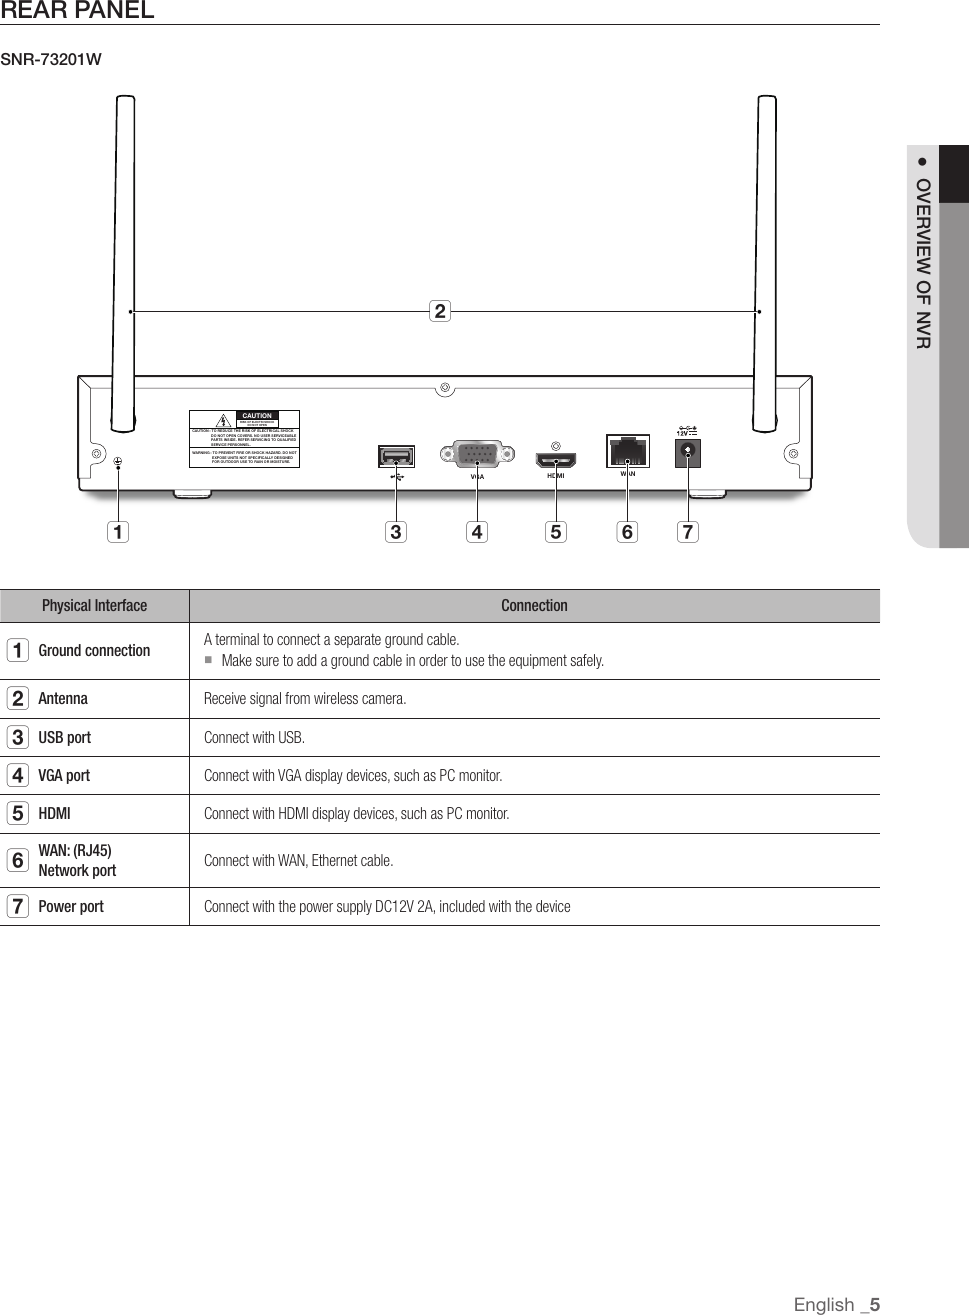 Page 5 of Hanwha Techwin SNR73201W 4 Channel Wireless NVR User Manual 